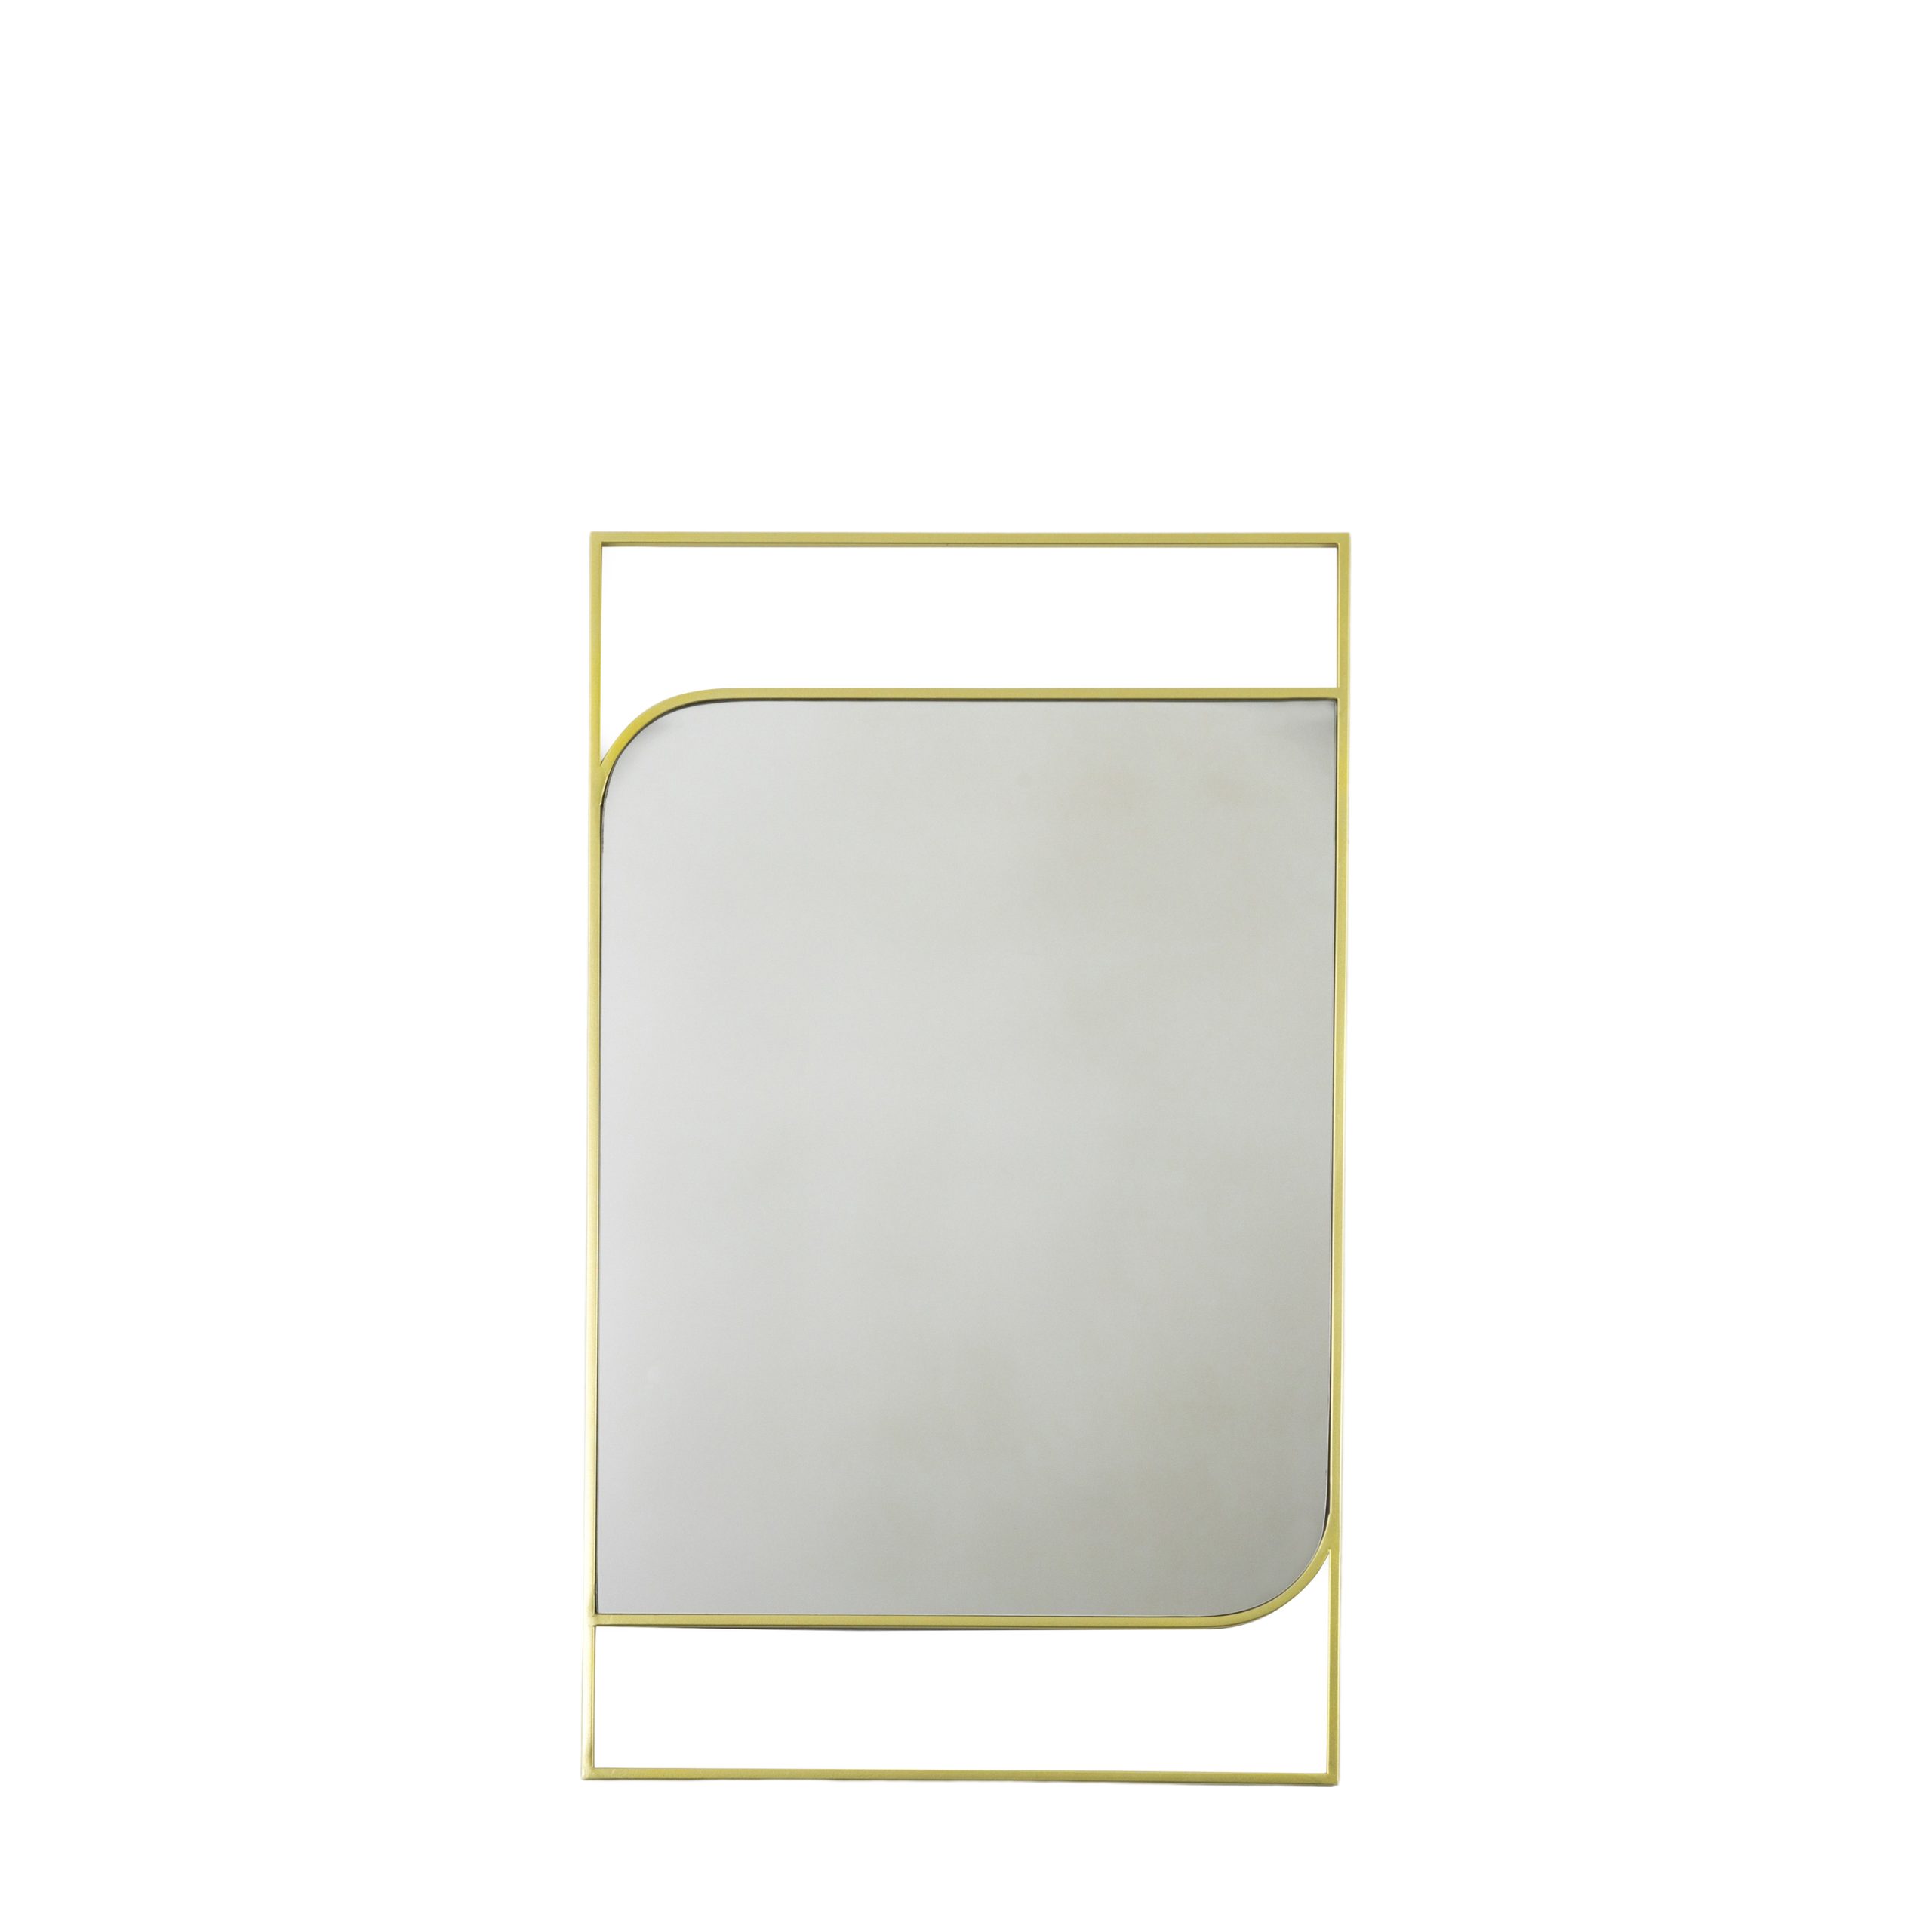 Gallery Direct Visano Mirror Champagne | Shackletons